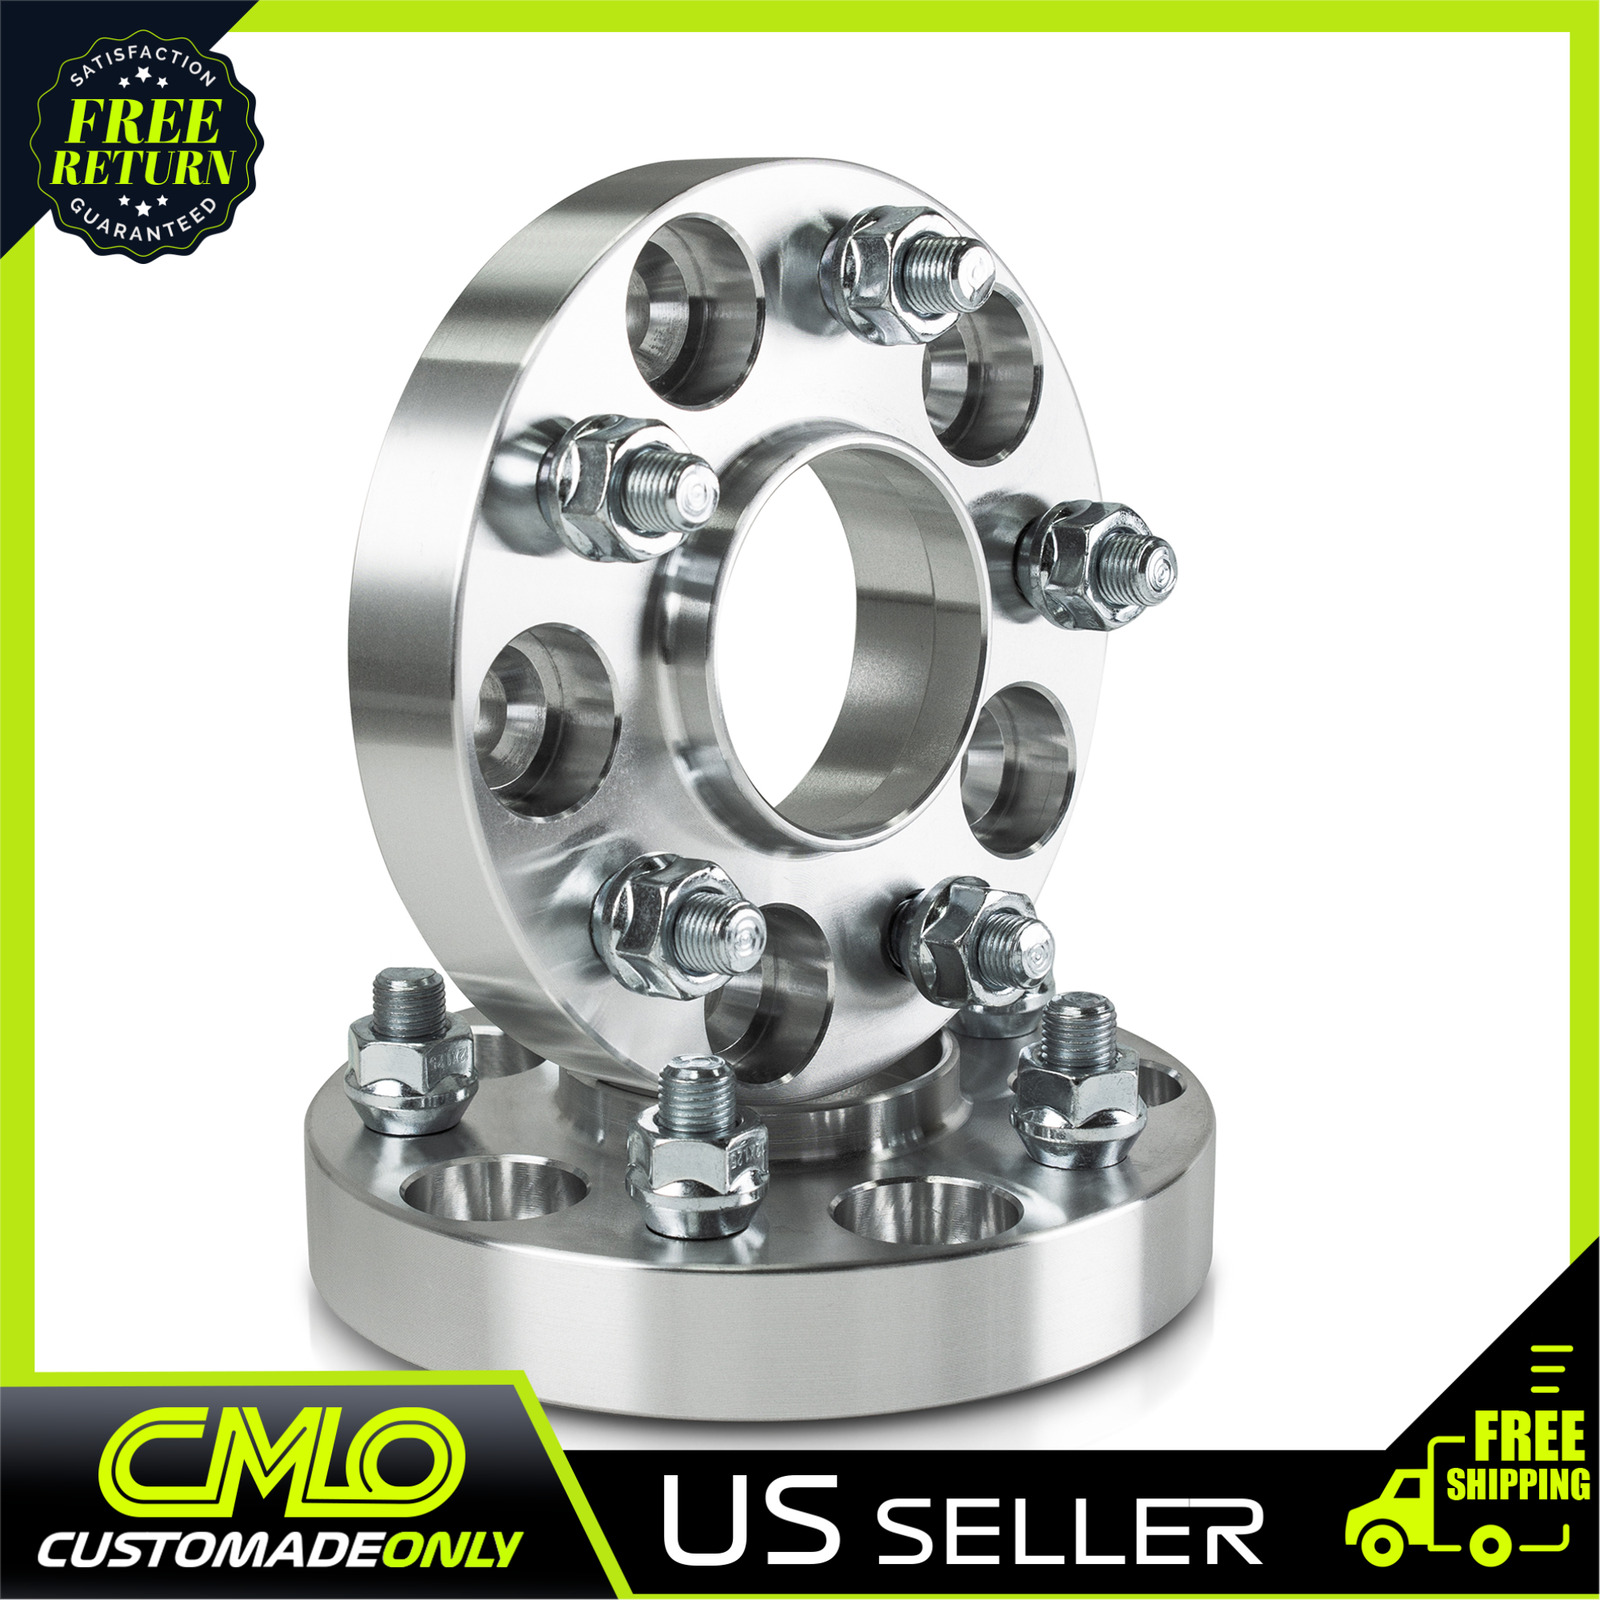 2) 20mm Hubcentric Wheel Spacers 5x120 For 2010-On Camaro Corvette C8 CTS ATS G8